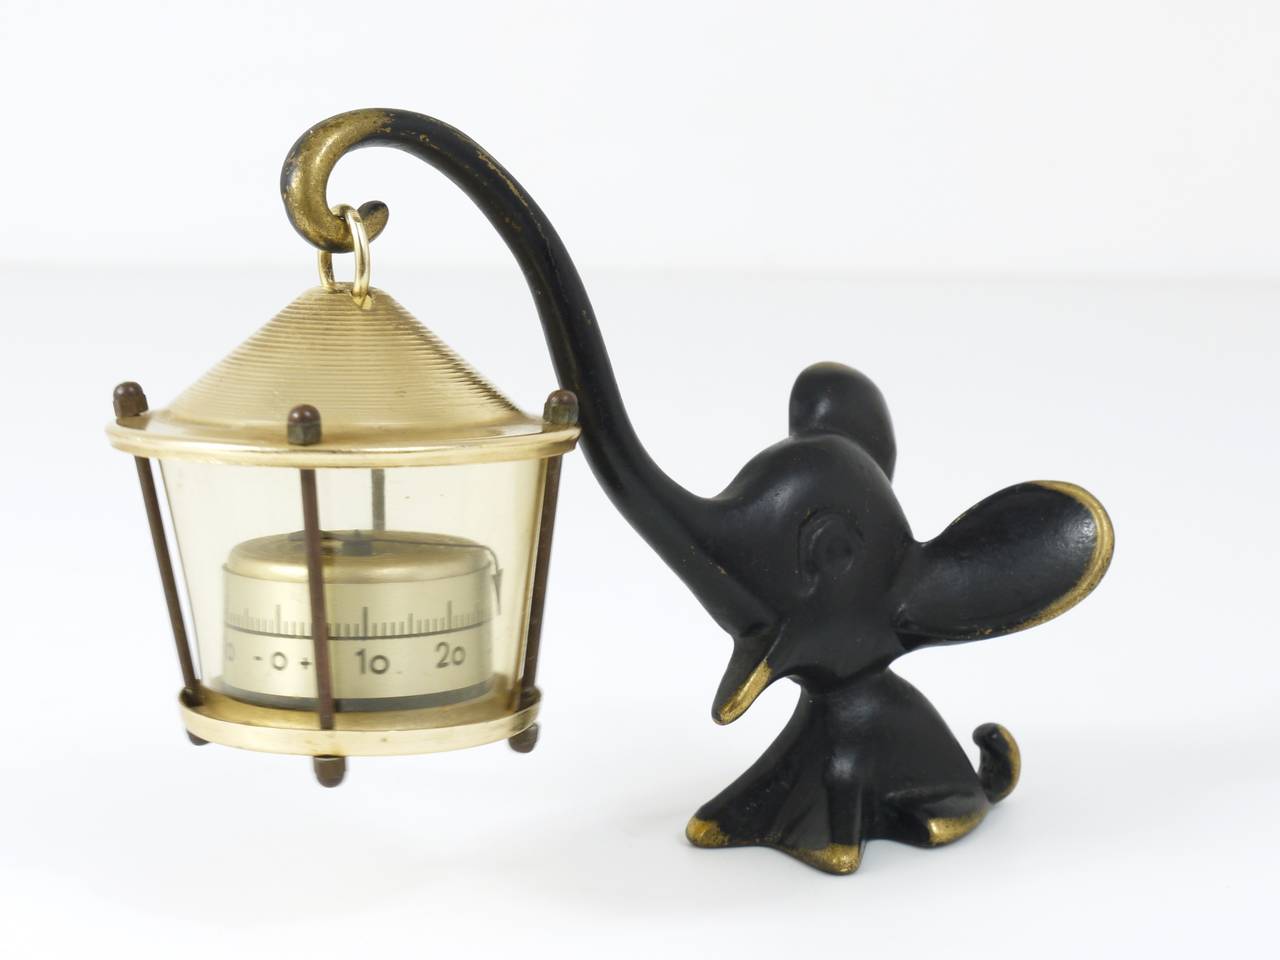 A charming Austrian desk thermometer, consisting of a lovely elephant figurine and a lantern-shaped thermometer. A very humorous design by Walter Bosse, executed by Hertha Baller Austria in the 1950s. Made of brass, in excellent condition.